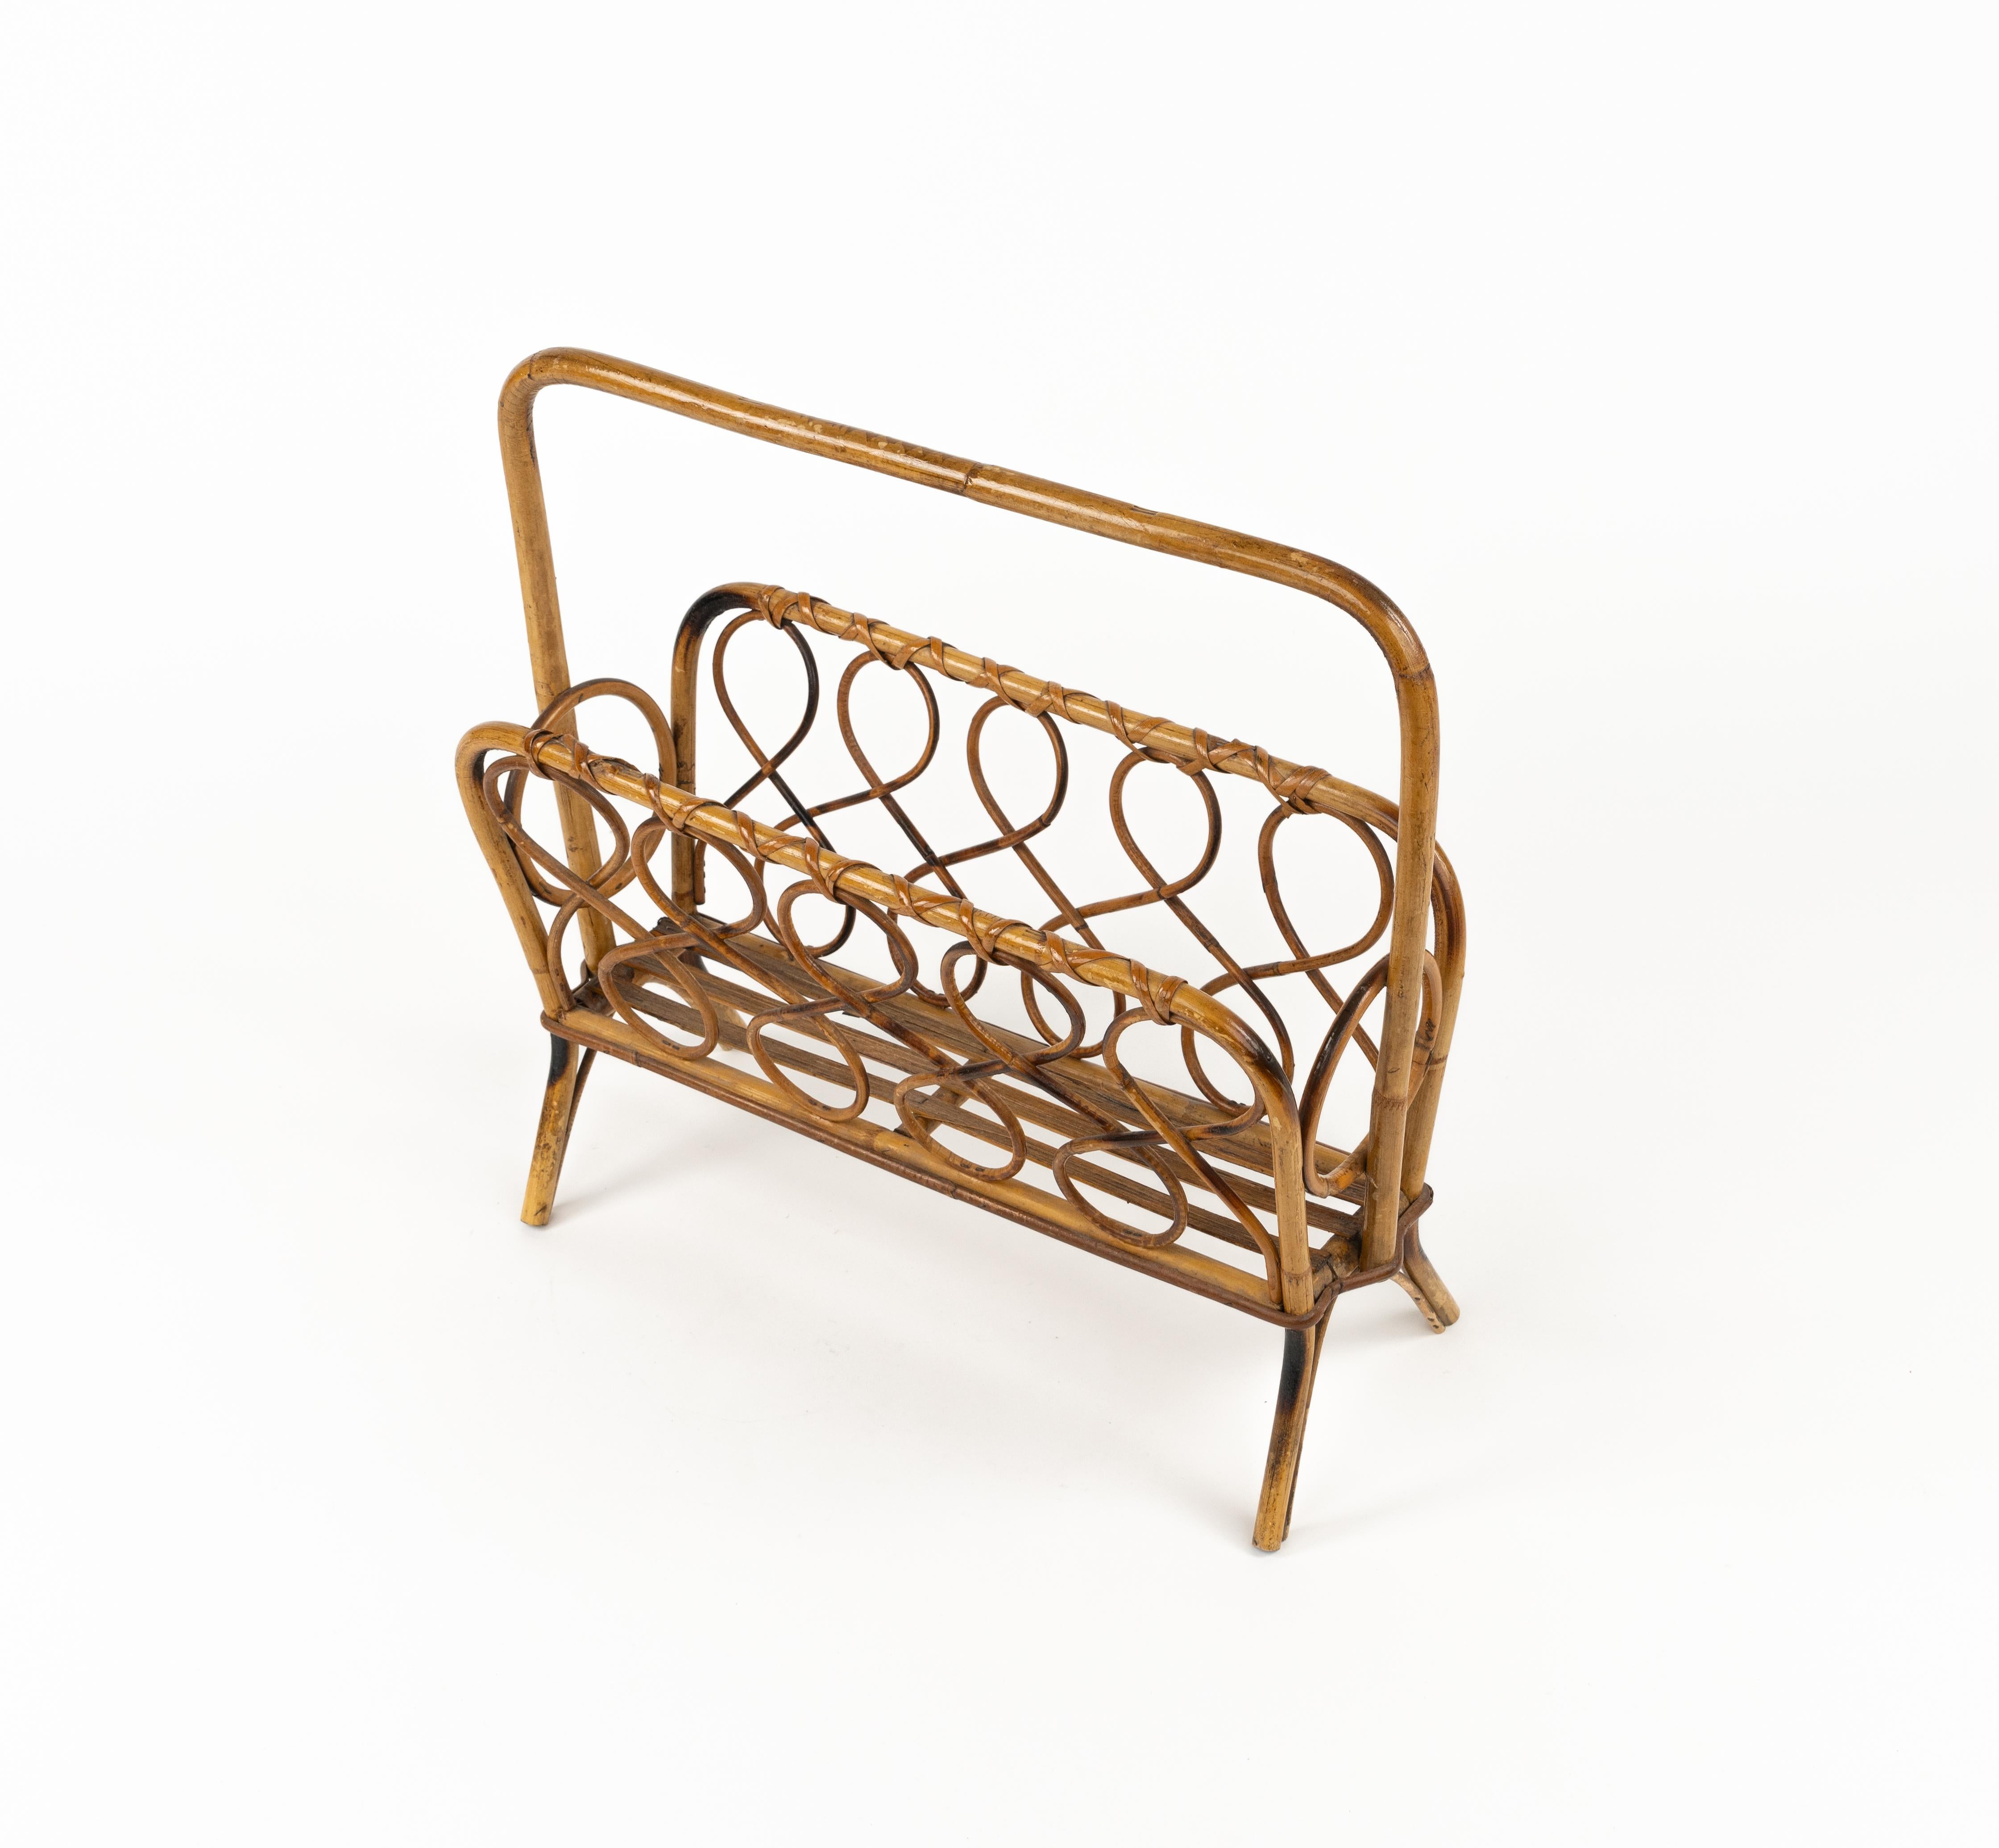 Midcentury Rattan and Bamboo Magazine Rack, Italy 1960s For Sale 2